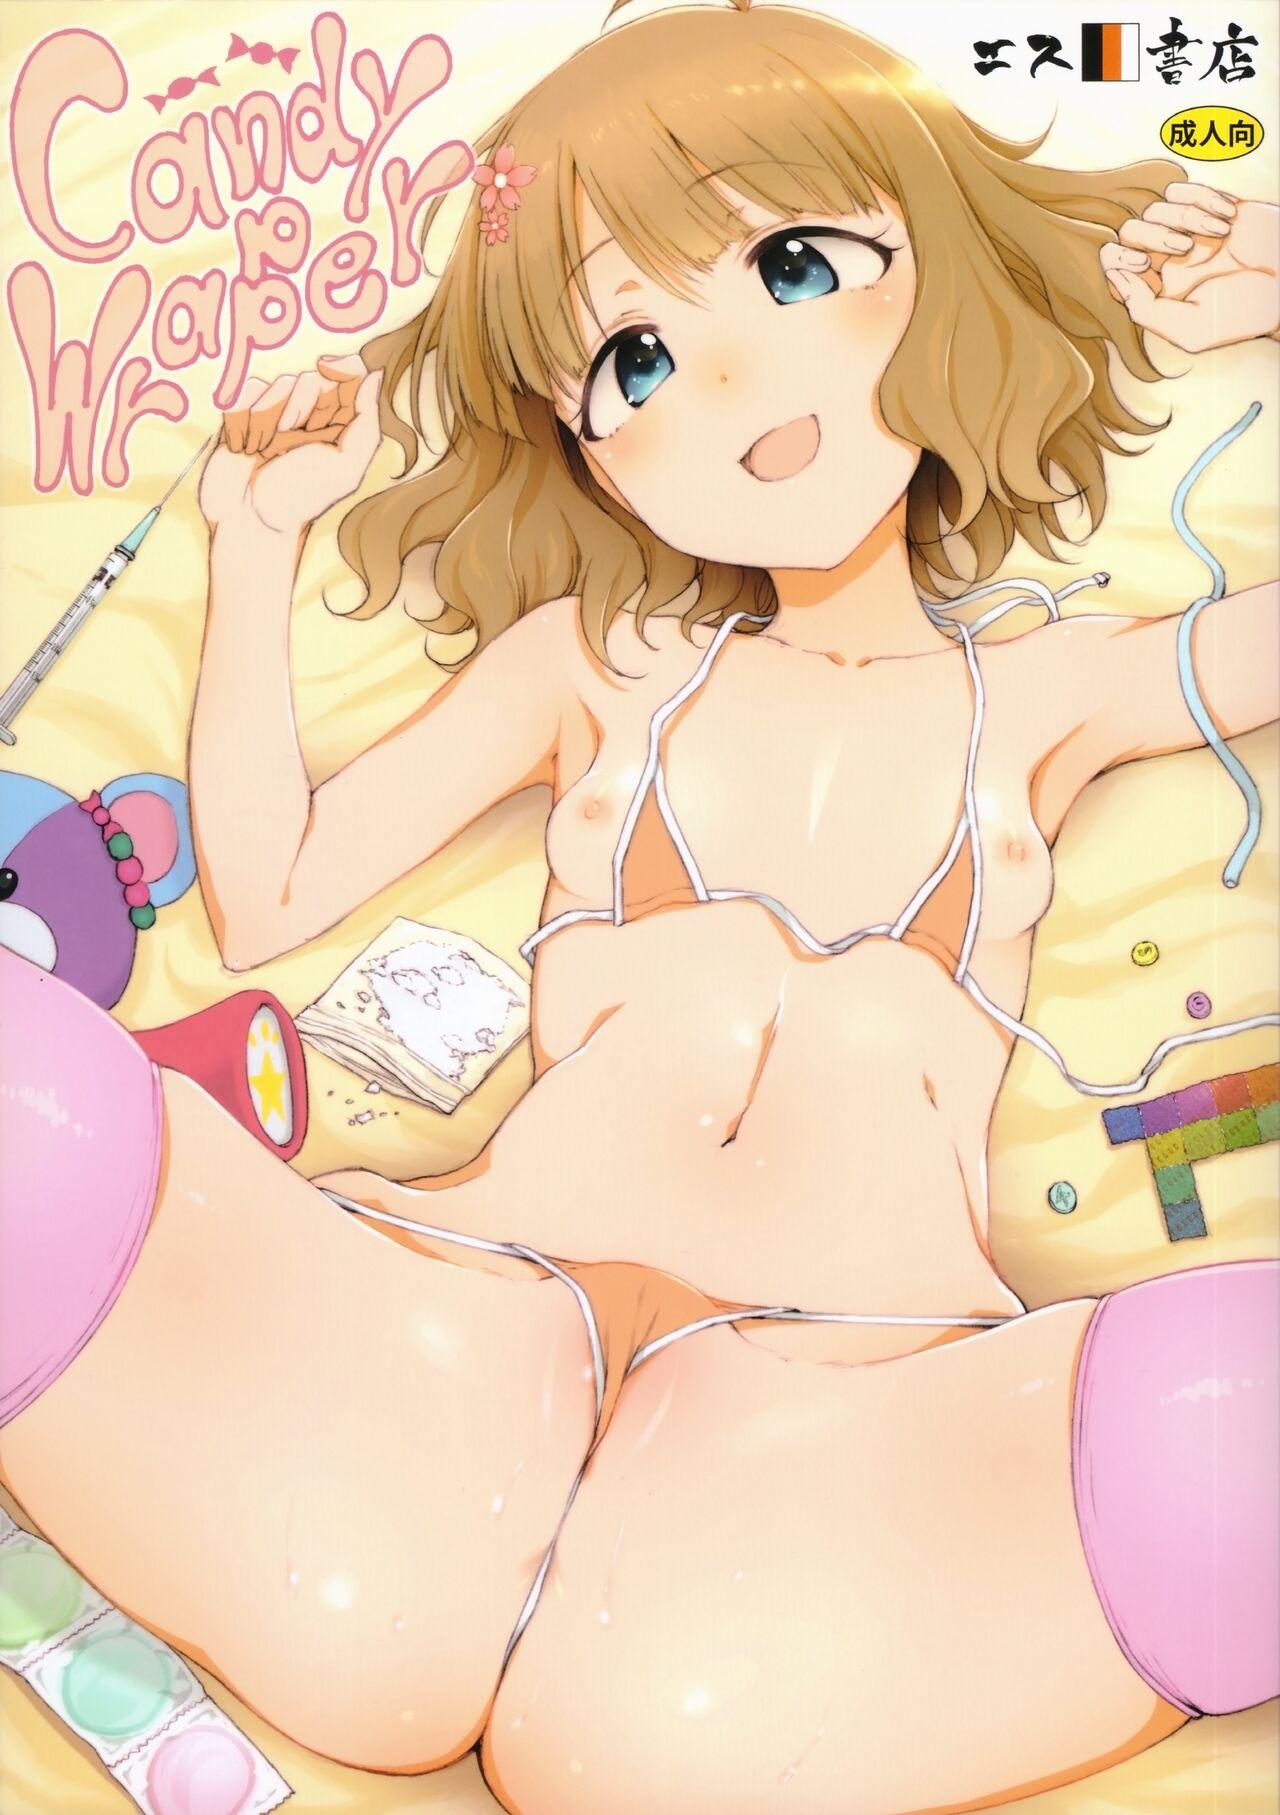 Fetish Candy Wrapper - The idolmaster Public Nudity - Page 2